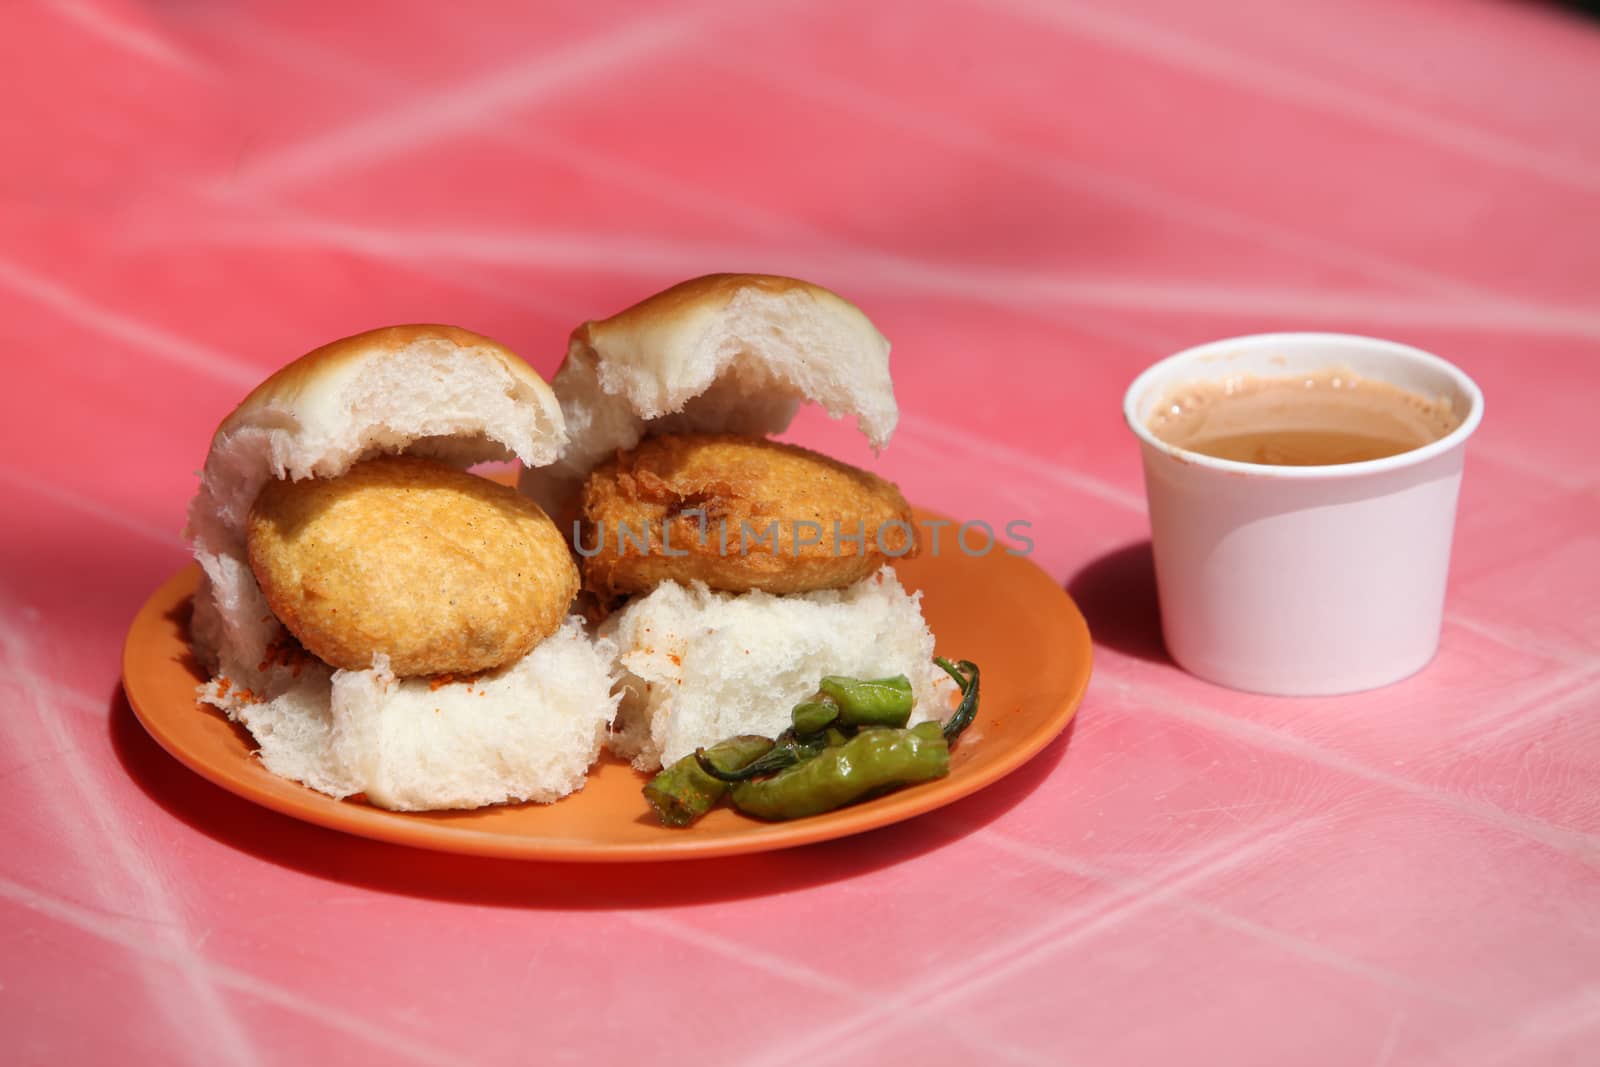 An Indian snack called Vada Pav which is like a potato burger or tikki n a bread, with a cup of tea